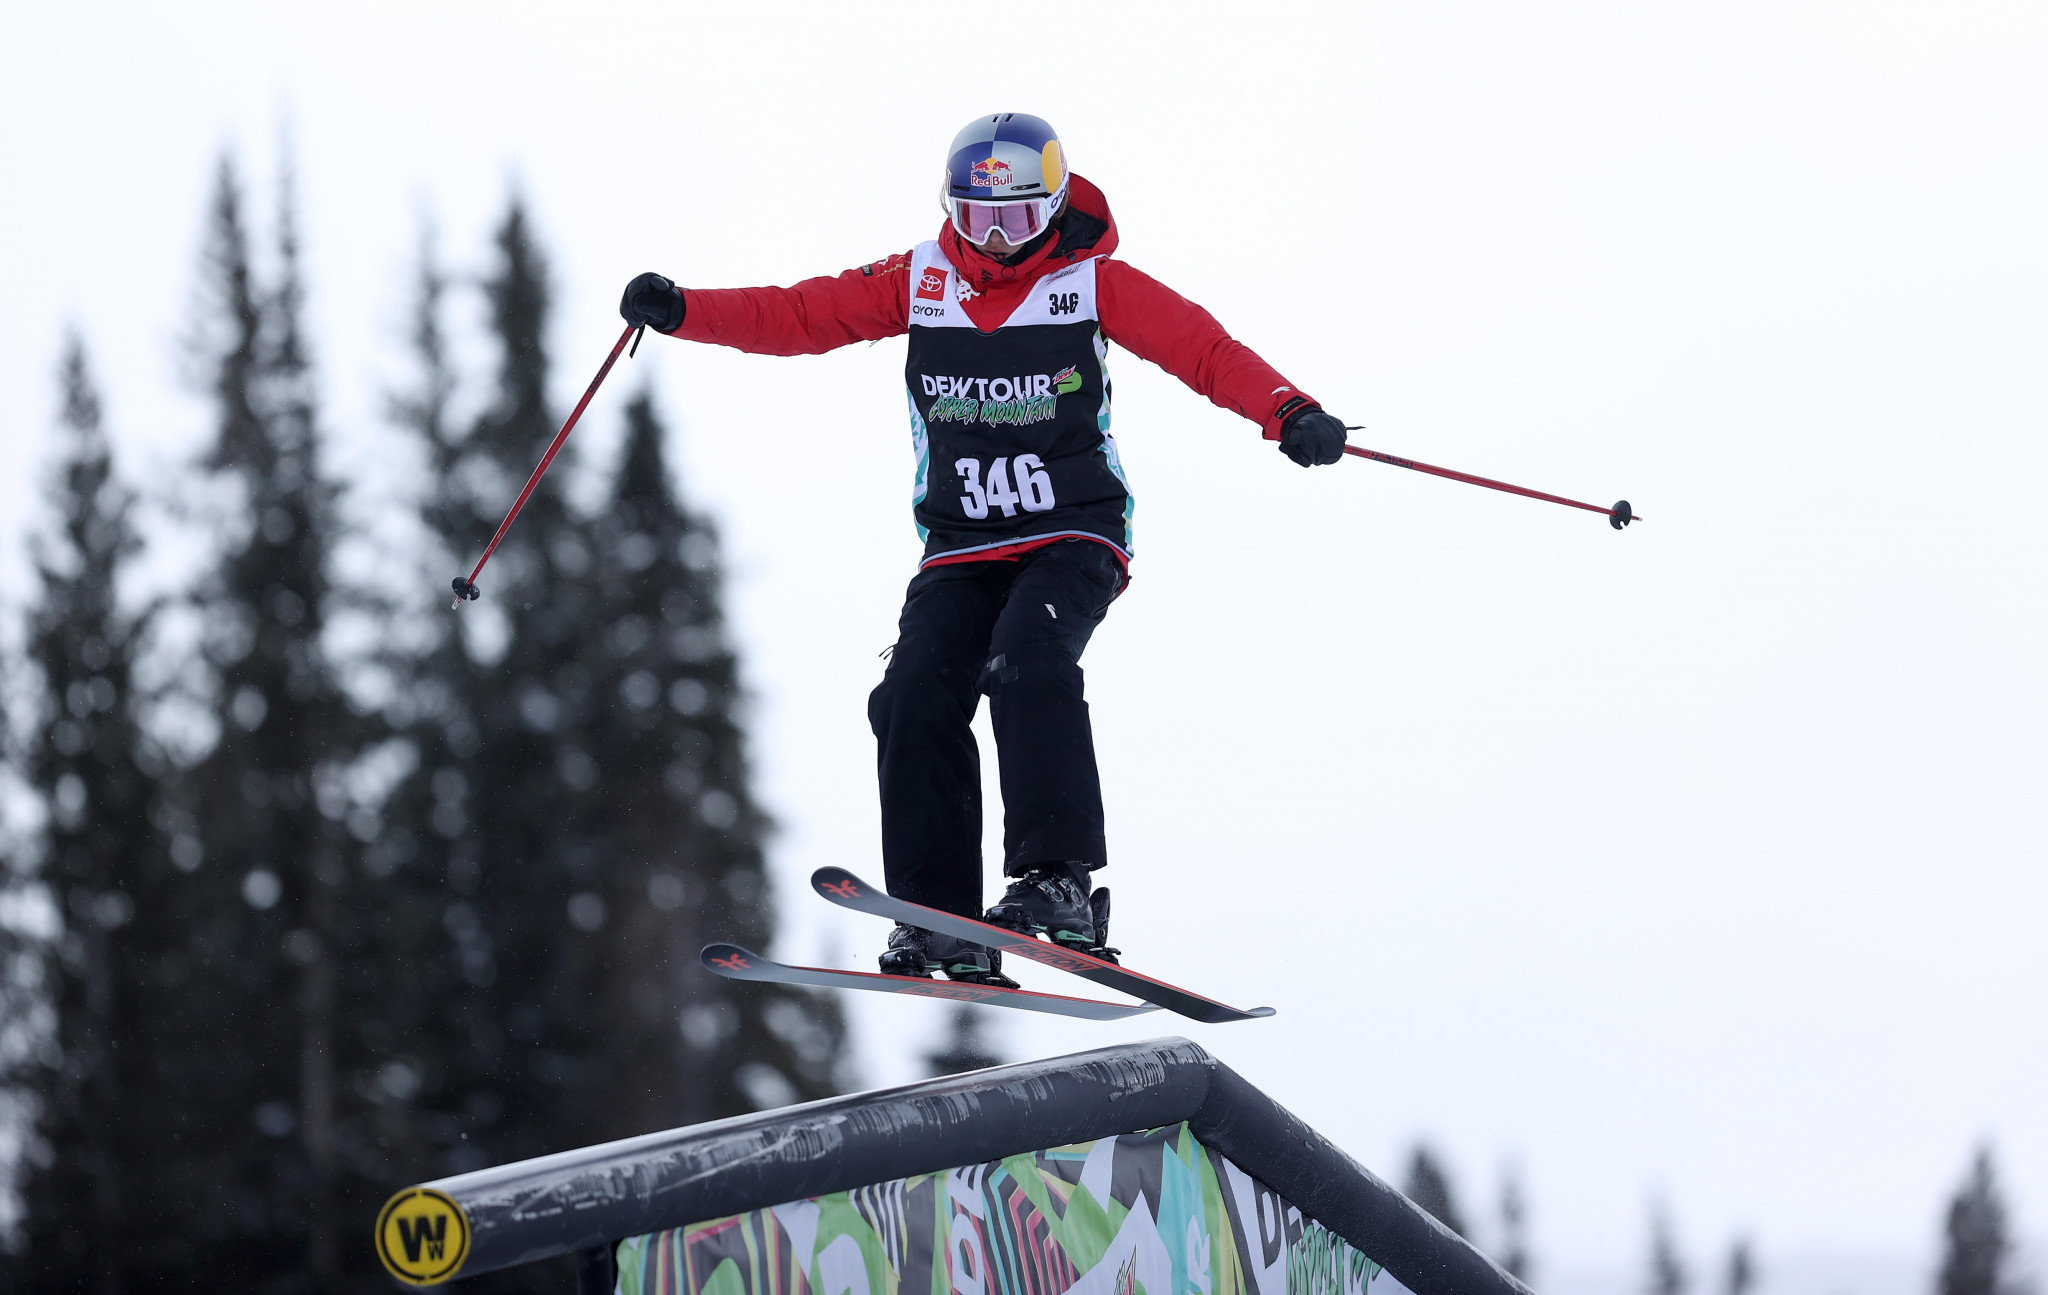 Freestyle skier Gu Ailing is a gold medal hope for China at Beijing 2022 ©Getty Images